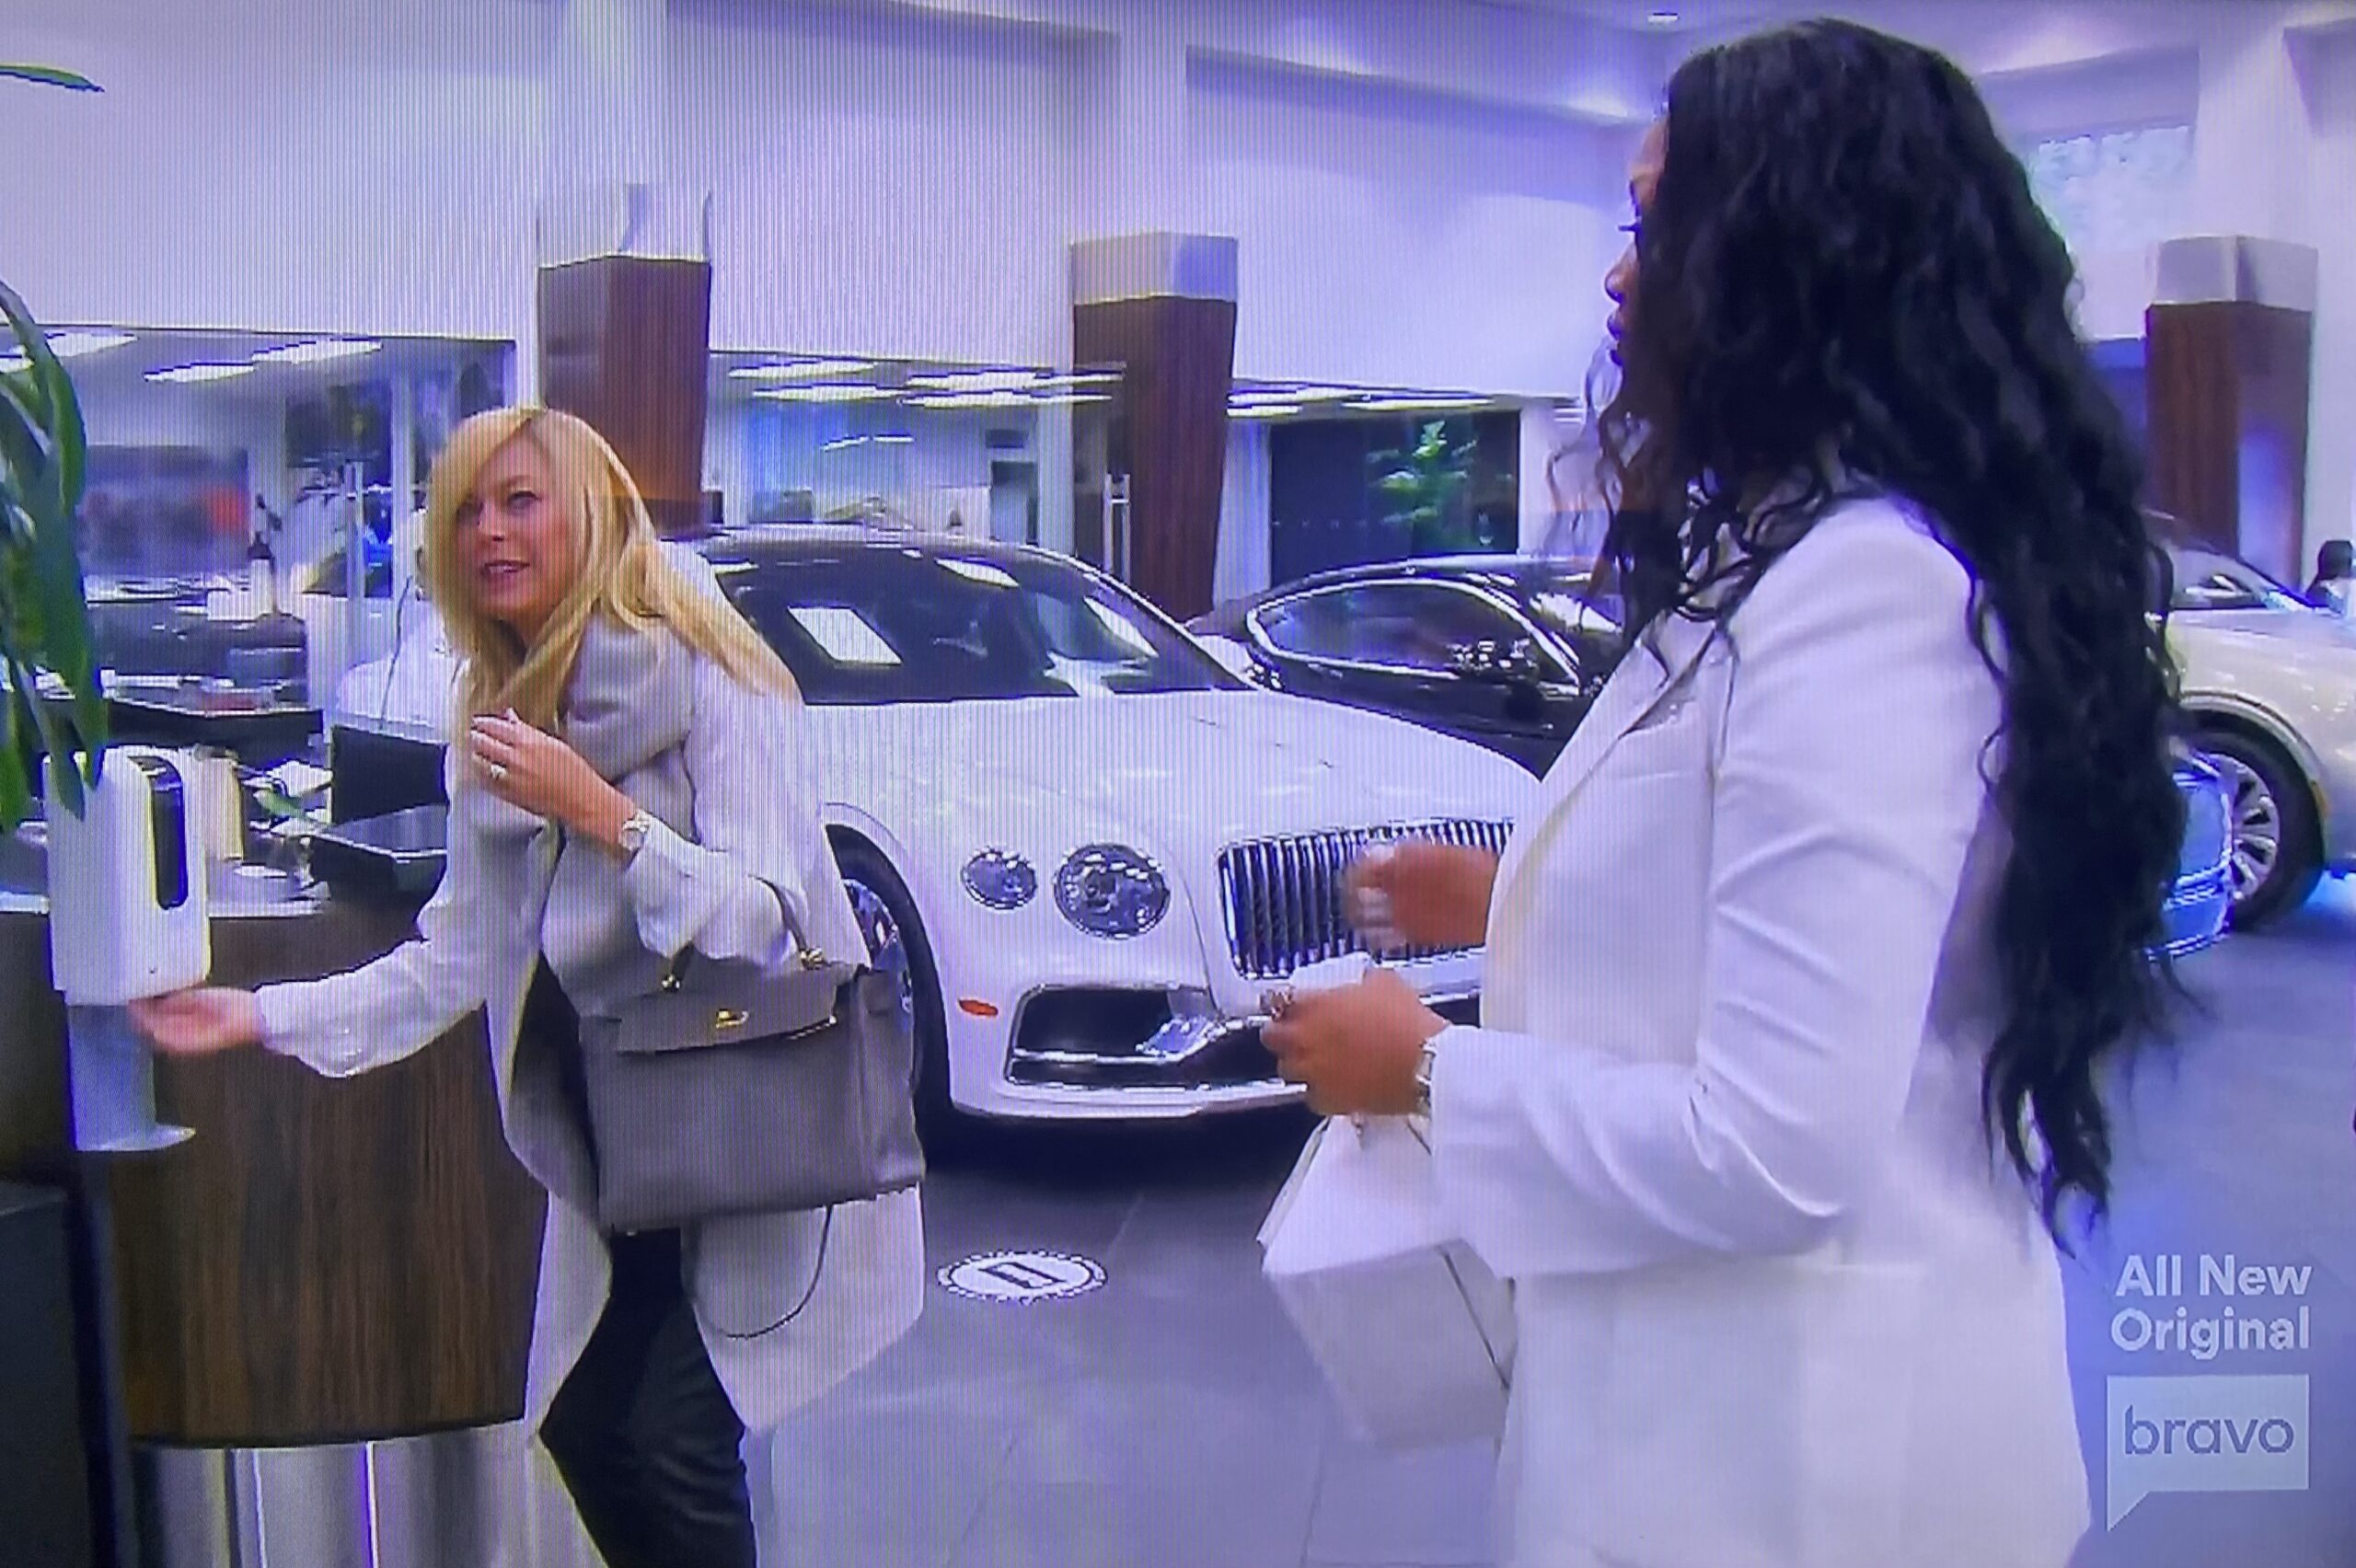 The Many Bags of The Real Housewives of Beverly Hills, Part 2 - PurseBlog   Balenciaga mini city, Louis vuitton alma bag, Housewives of beverly hills